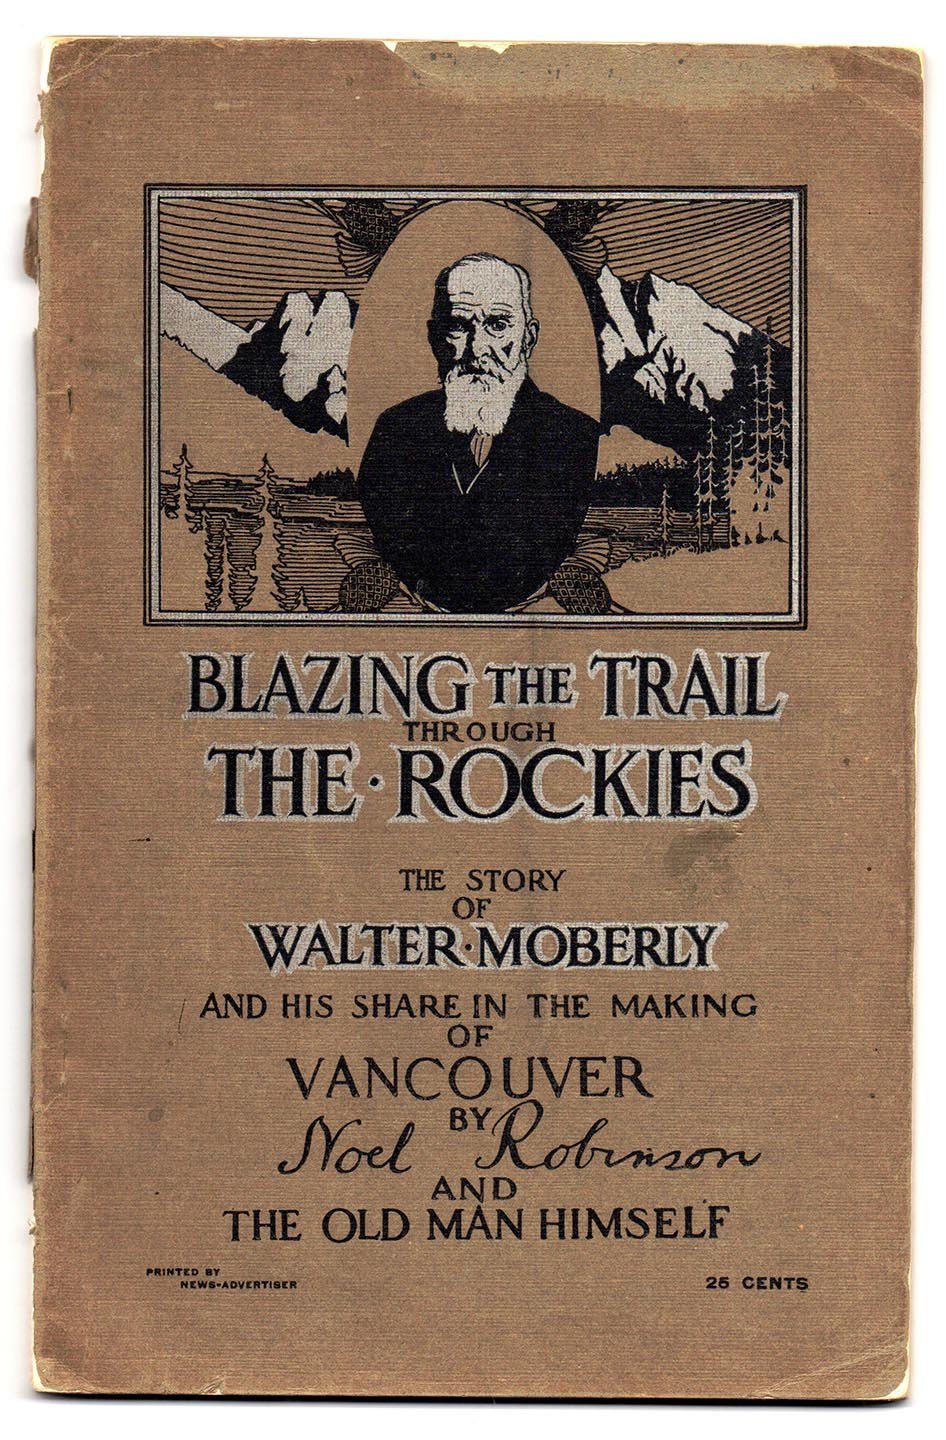 Blazing the Trail Through the Rockies: The Story of Walter Moberly and His Share in the Making of Vancouver